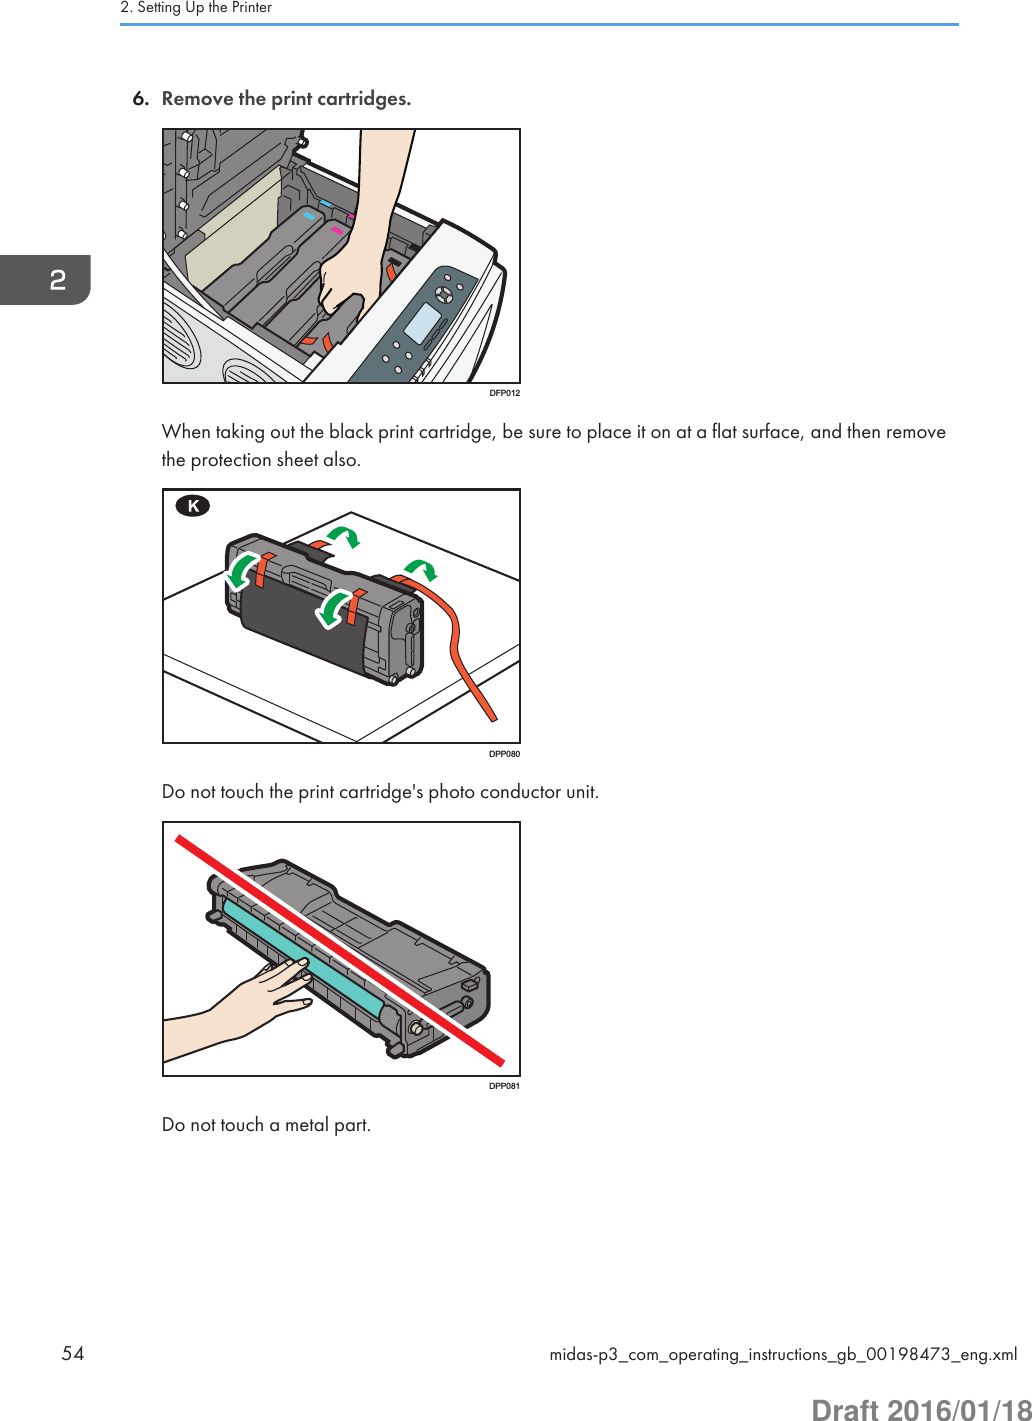 6. Remove the print cartridges.DFP012When taking out the black print cartridge, be sure to place it on at a flat surface, and then removethe protection sheet also.DPP080Do not touch the print cartridge&apos;s photo conductor unit.DPP081Do not touch a metal part.2. Setting Up the Printer54 midas-p3_com_operating_instructions_gb_00198473_eng.xmlDraft 2016/01/18